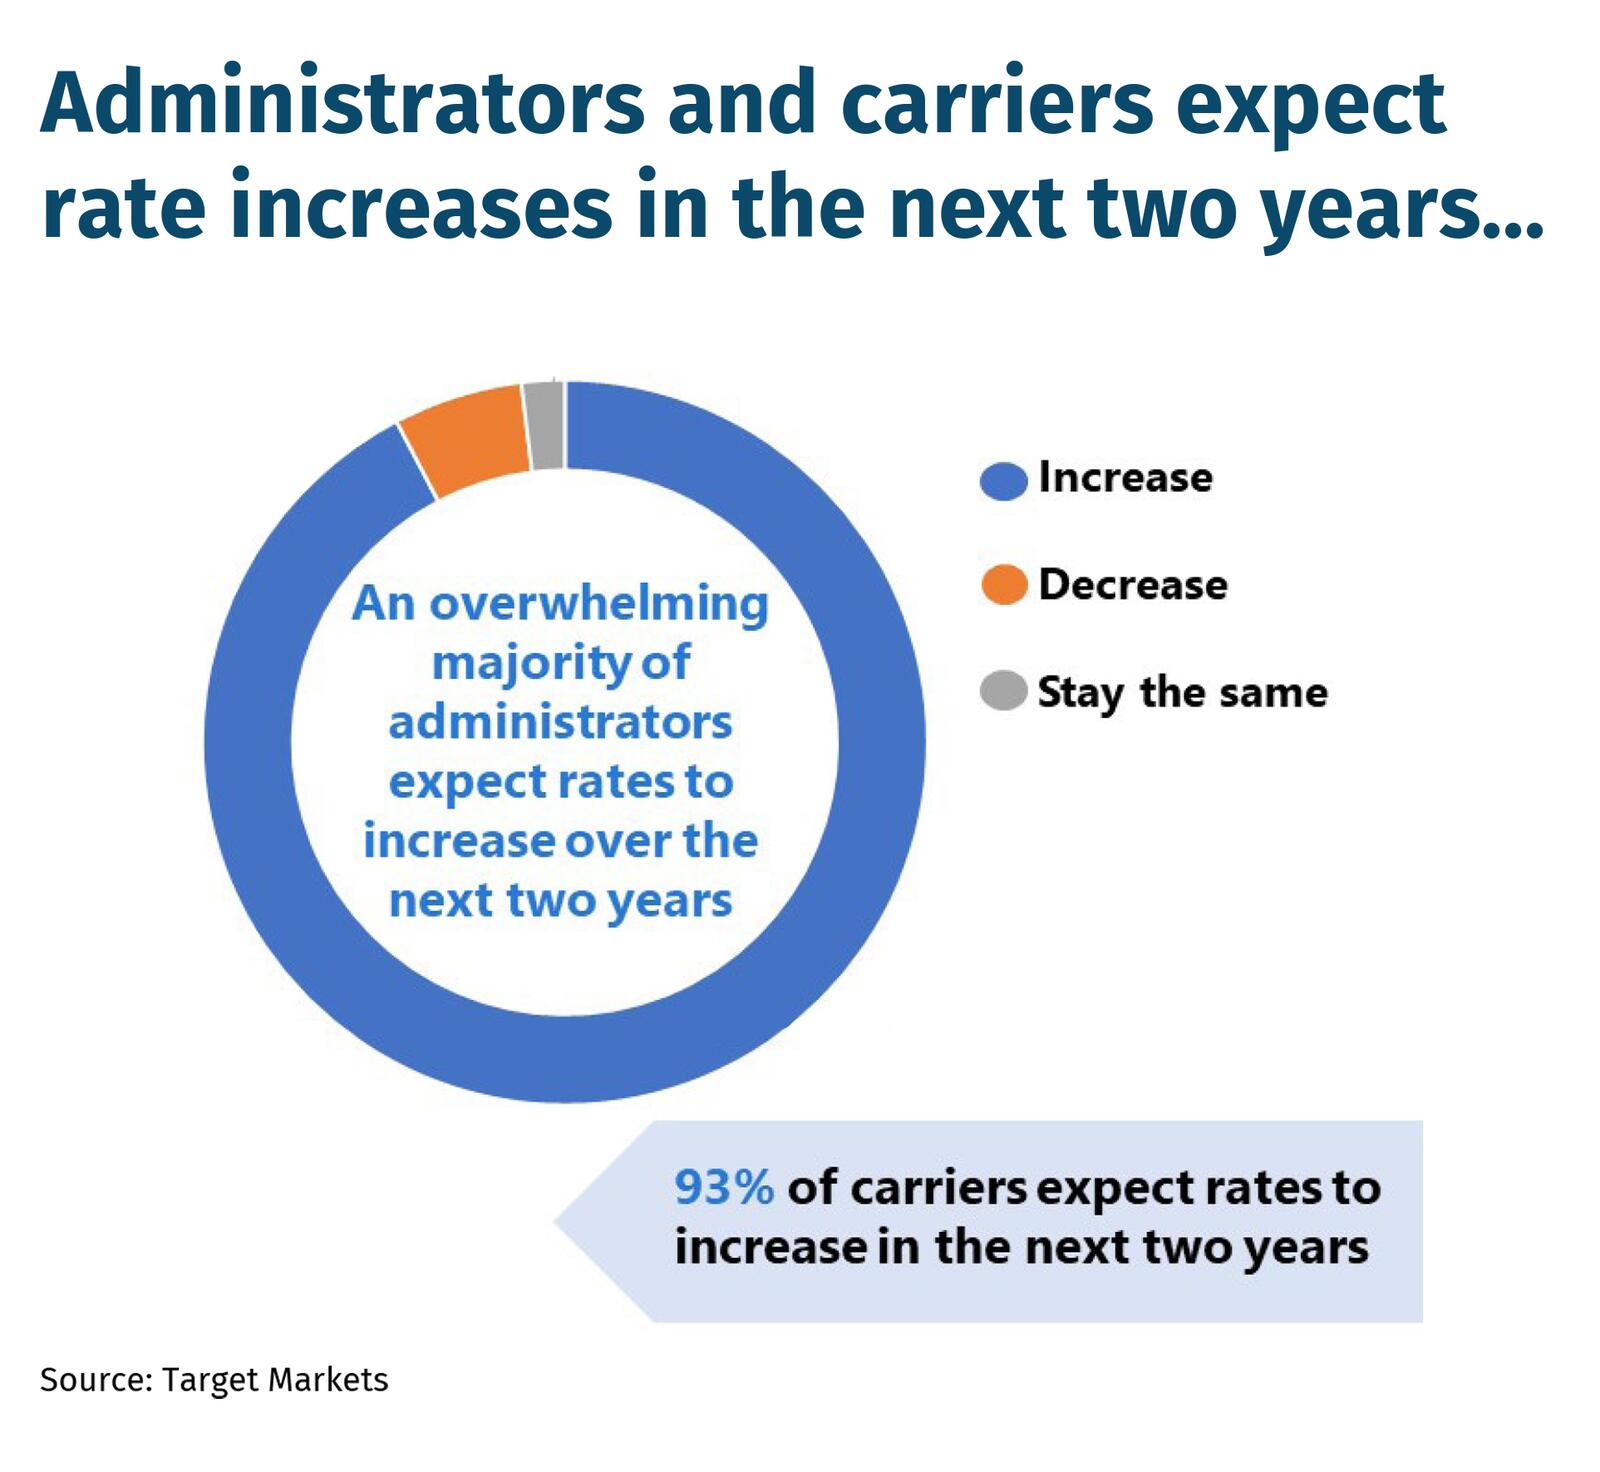 Administrators and carriers expect rate increases in the next two years...